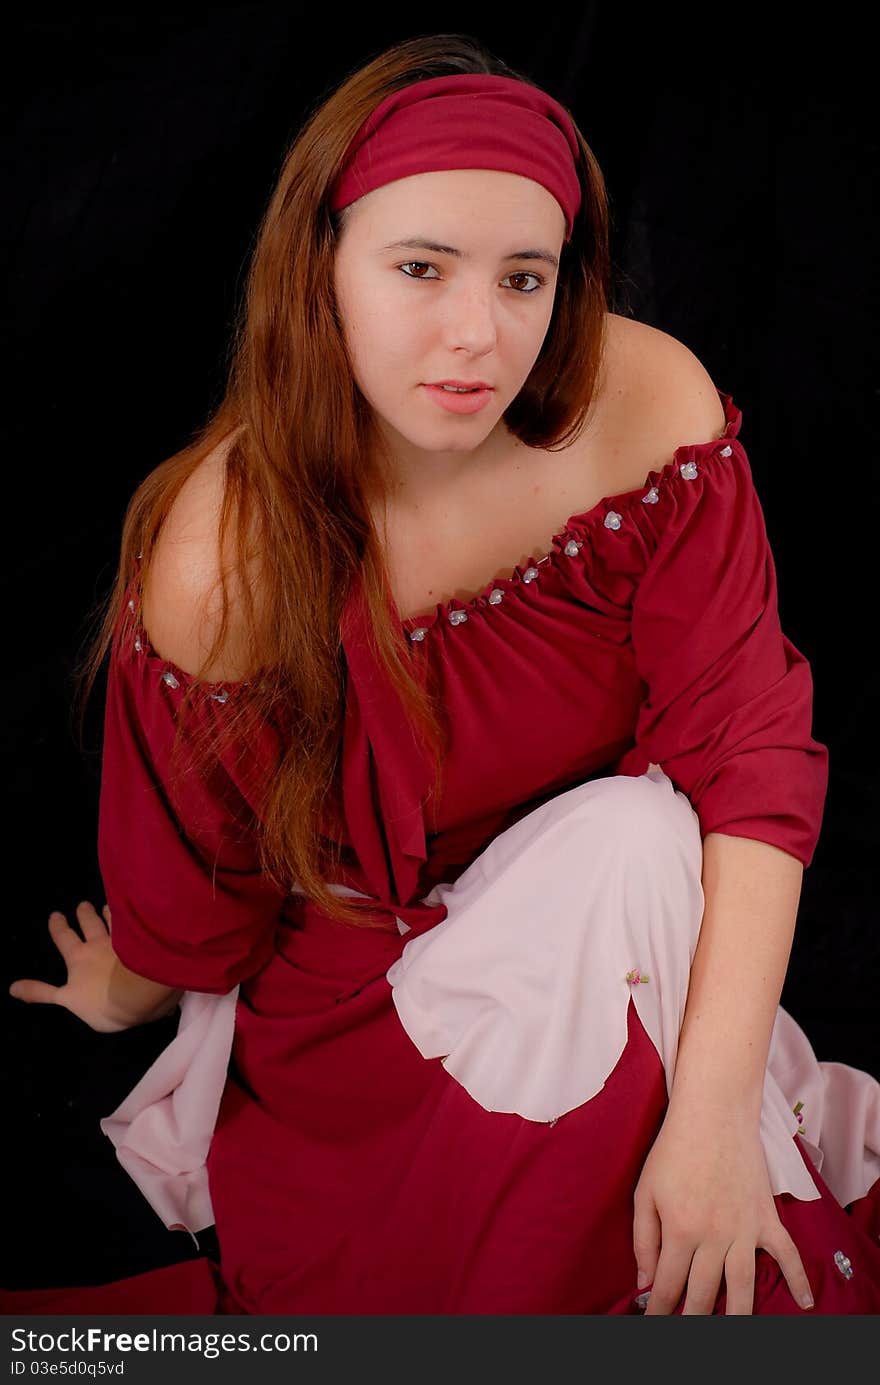 Portrait of a Young Gypsy Girl Sitting Down (Halloween Costume)